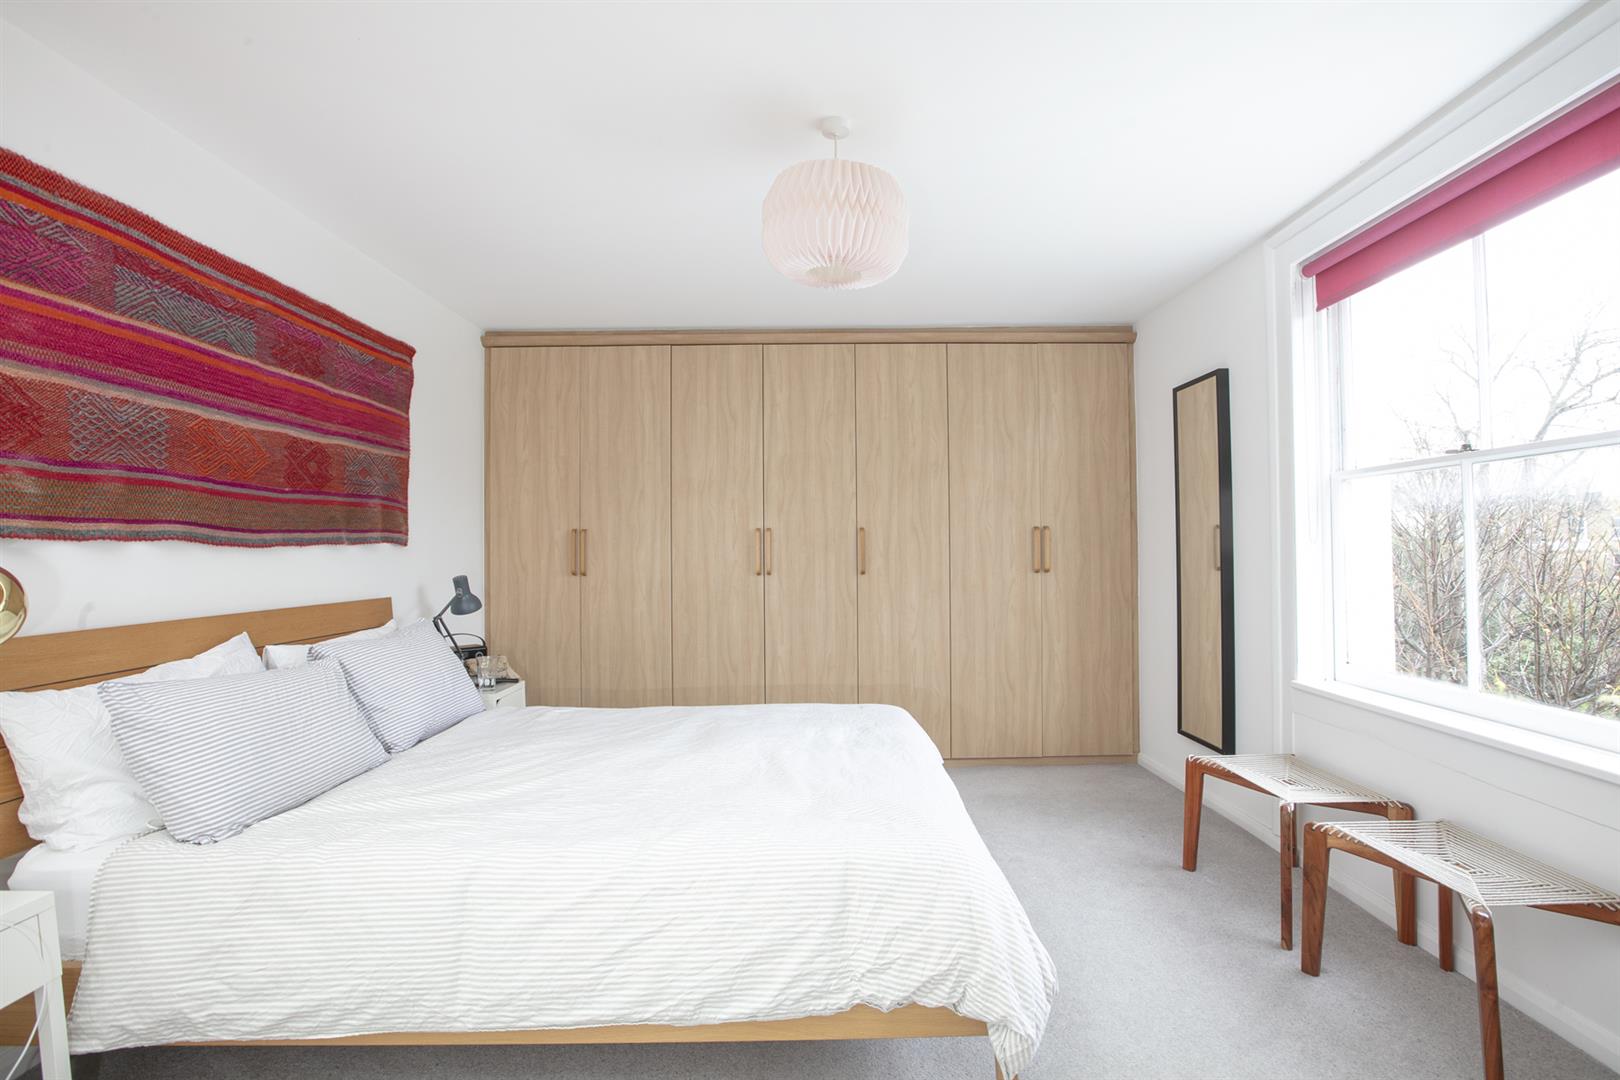 Flat - Conversion For Sale in Holly Grove, Peckham, SE15 893 view14